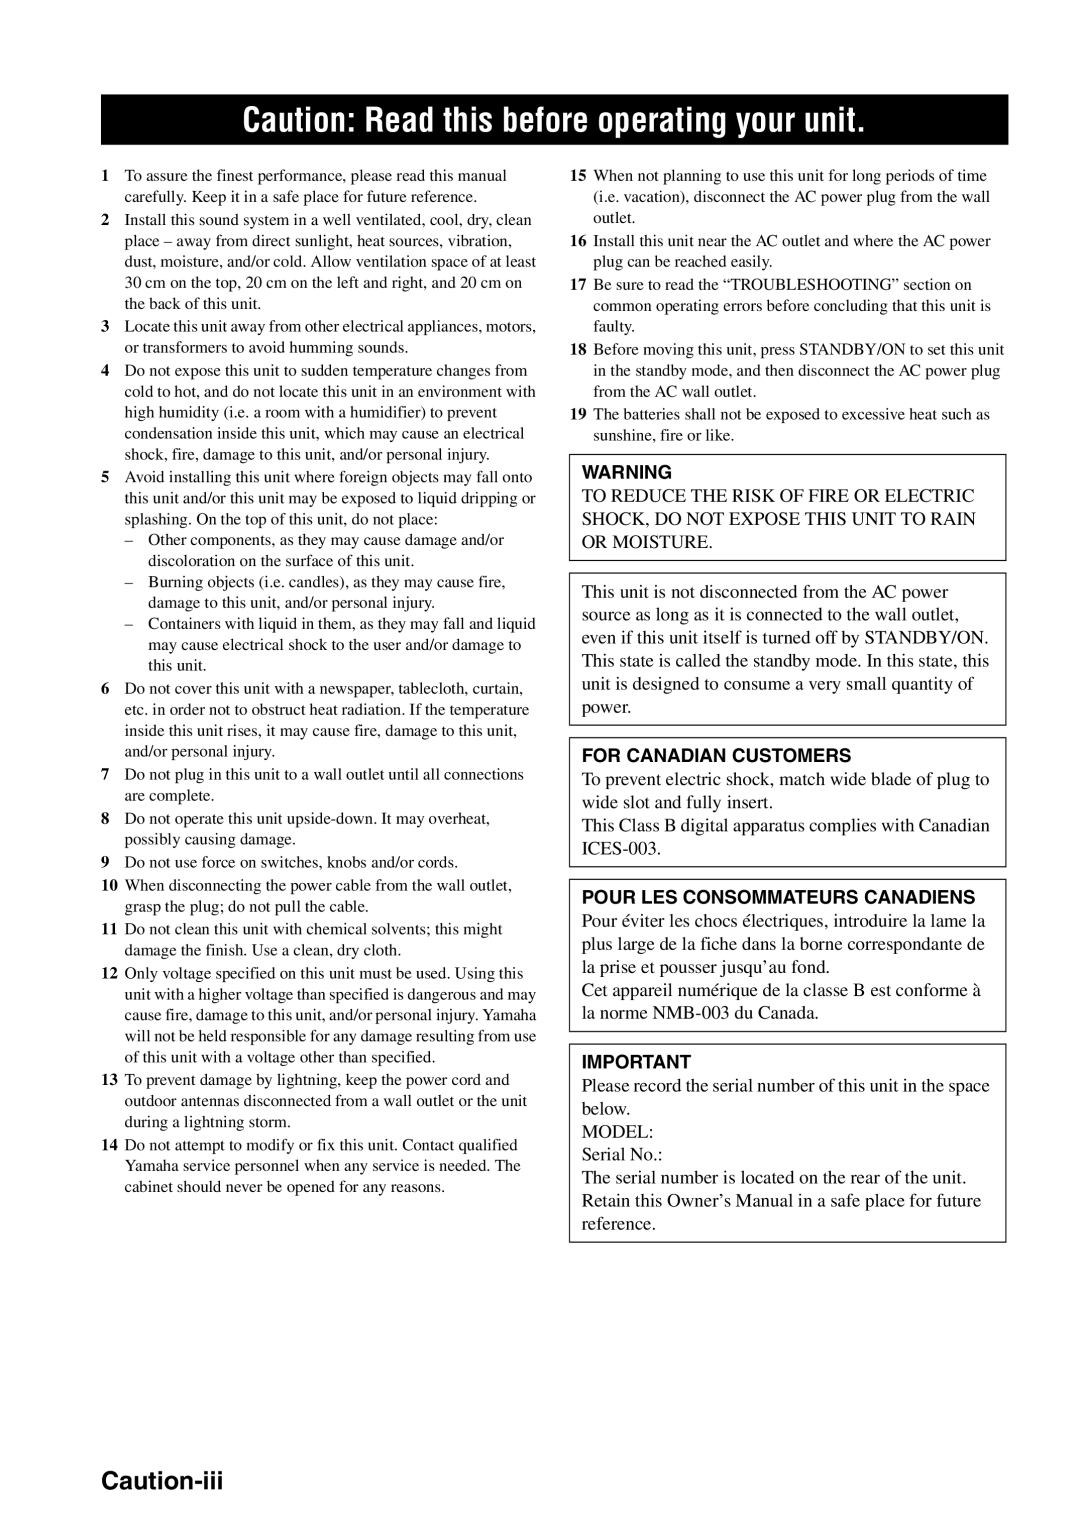 Yamaha HTR-6060 owner manual Caution: Read this before operating your unit, Caution-iii, For Canadian Customers 